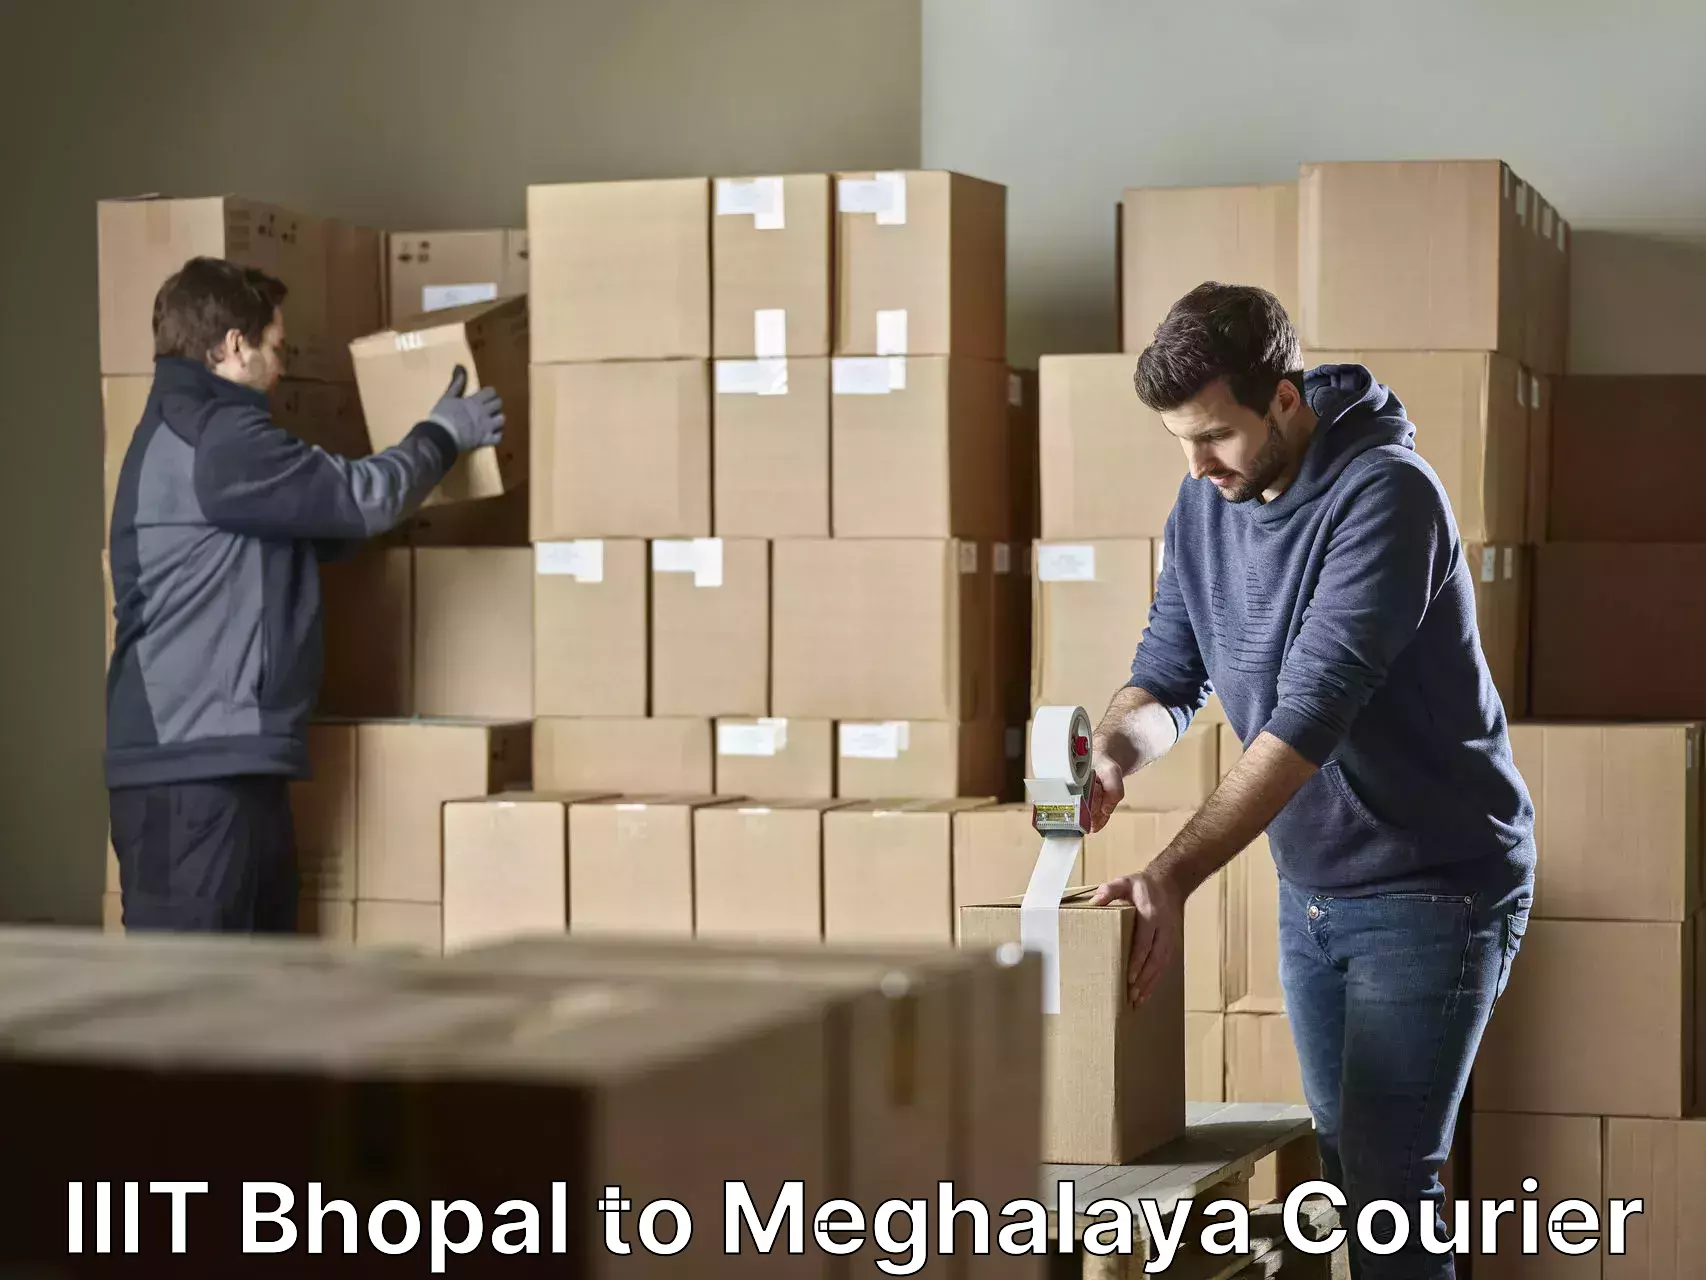 Professional moving company IIIT Bhopal to Shillong